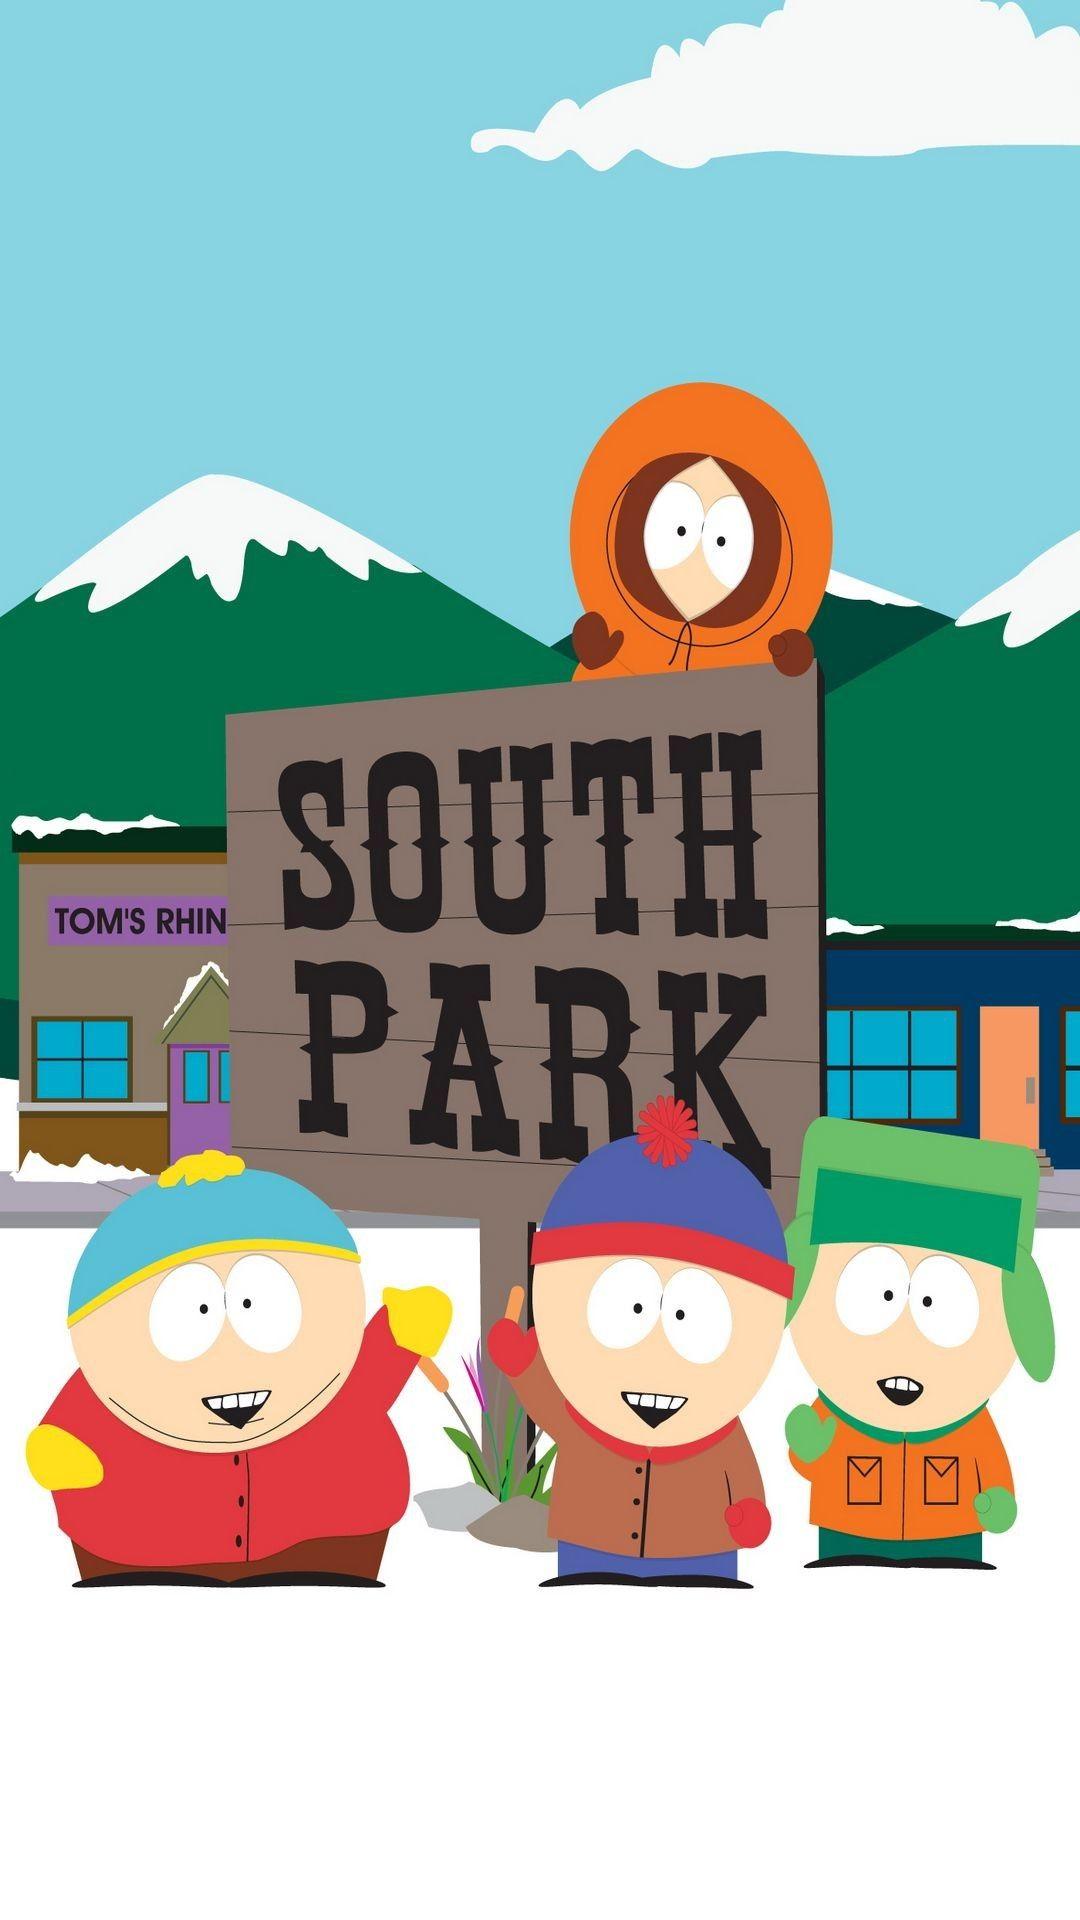 south park wallpaper hd backgrounds images 1080P 2k 4k HD wallpapers  backgrounds free download  Rare Gallery